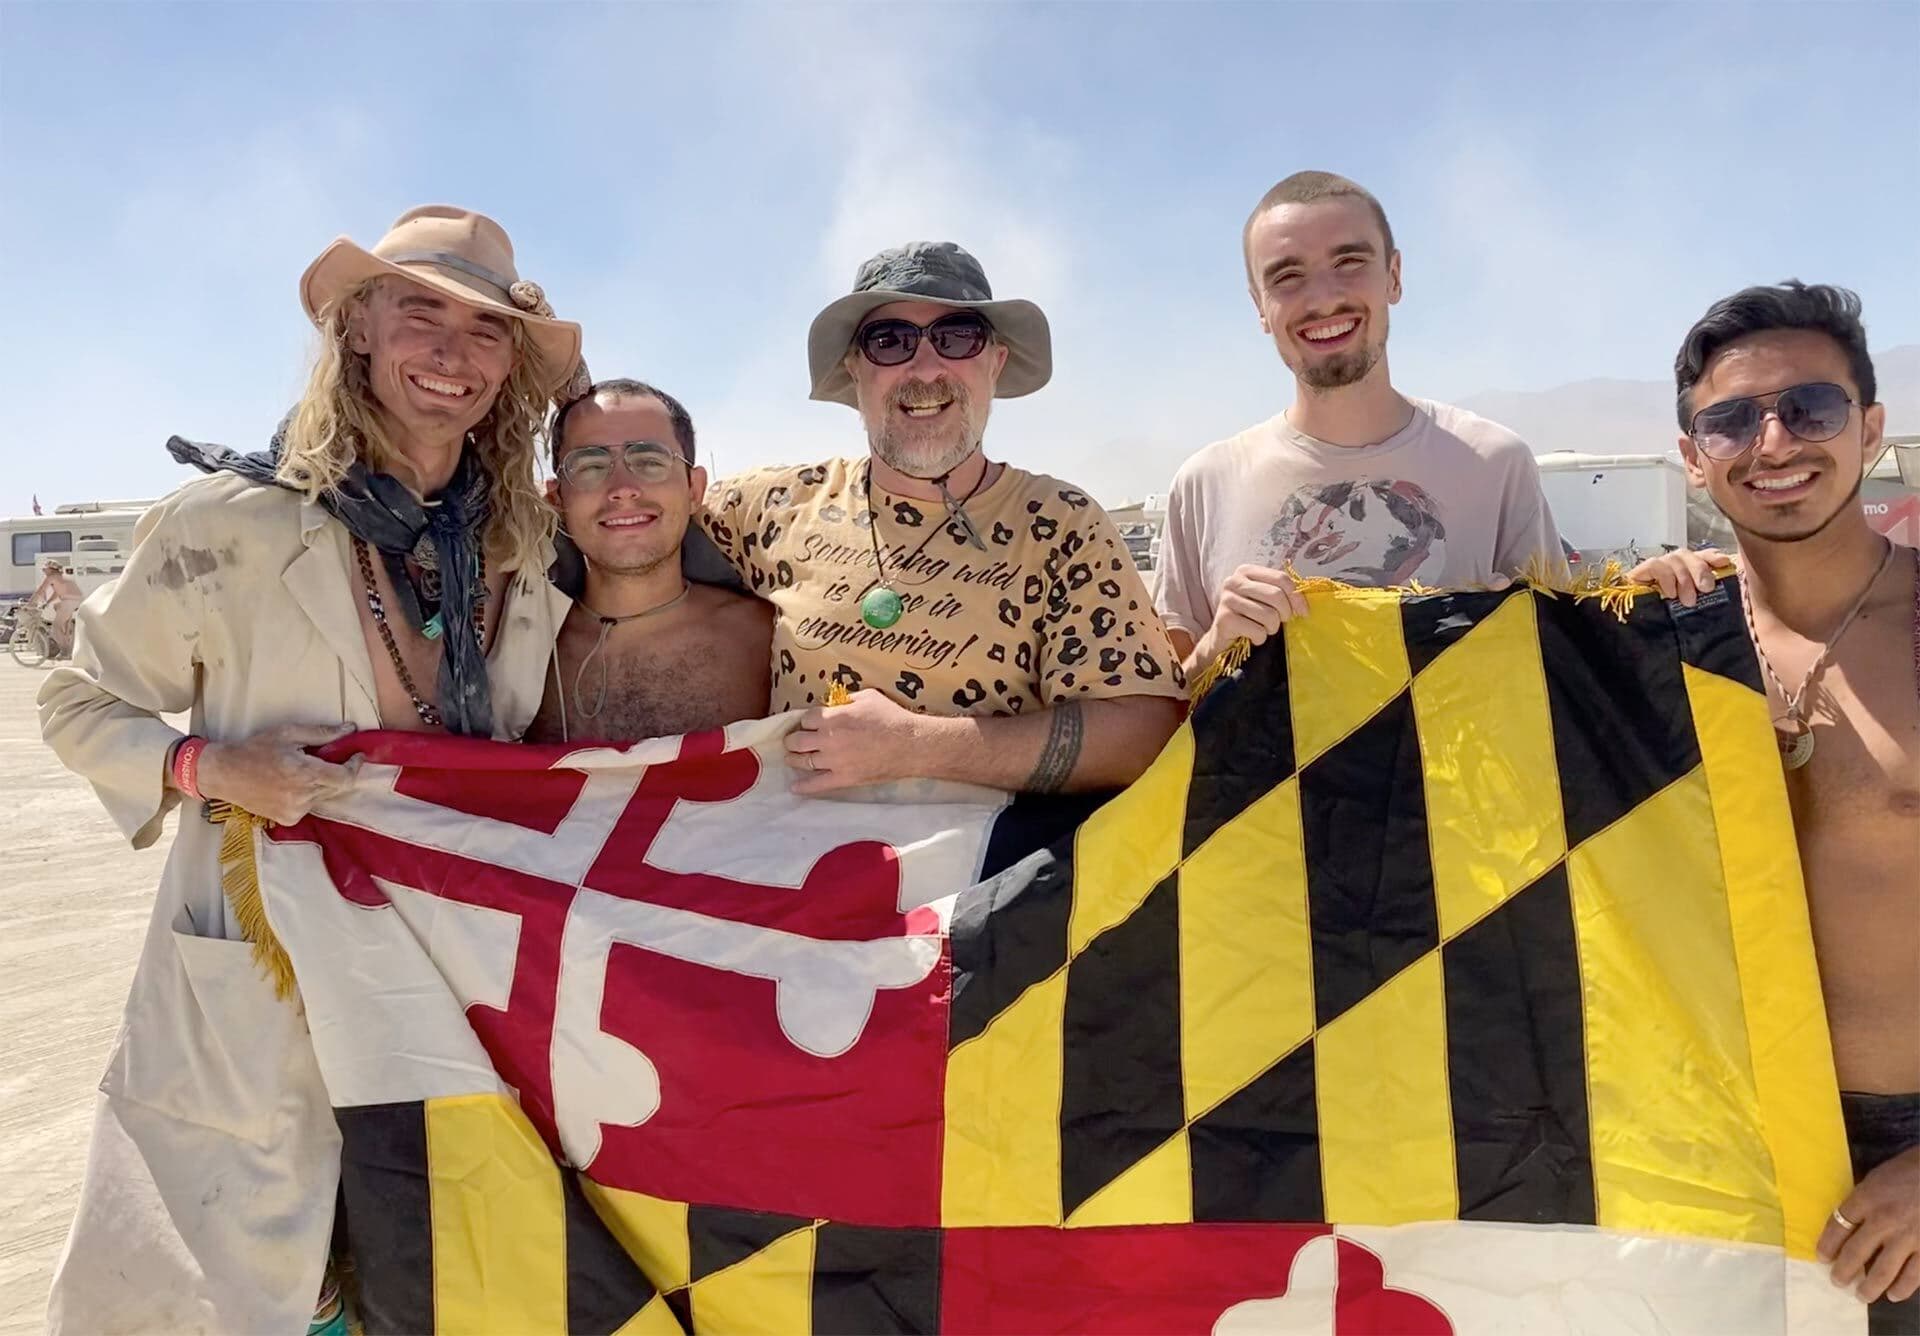 Group of five holds Maryland state flag at Burning Man